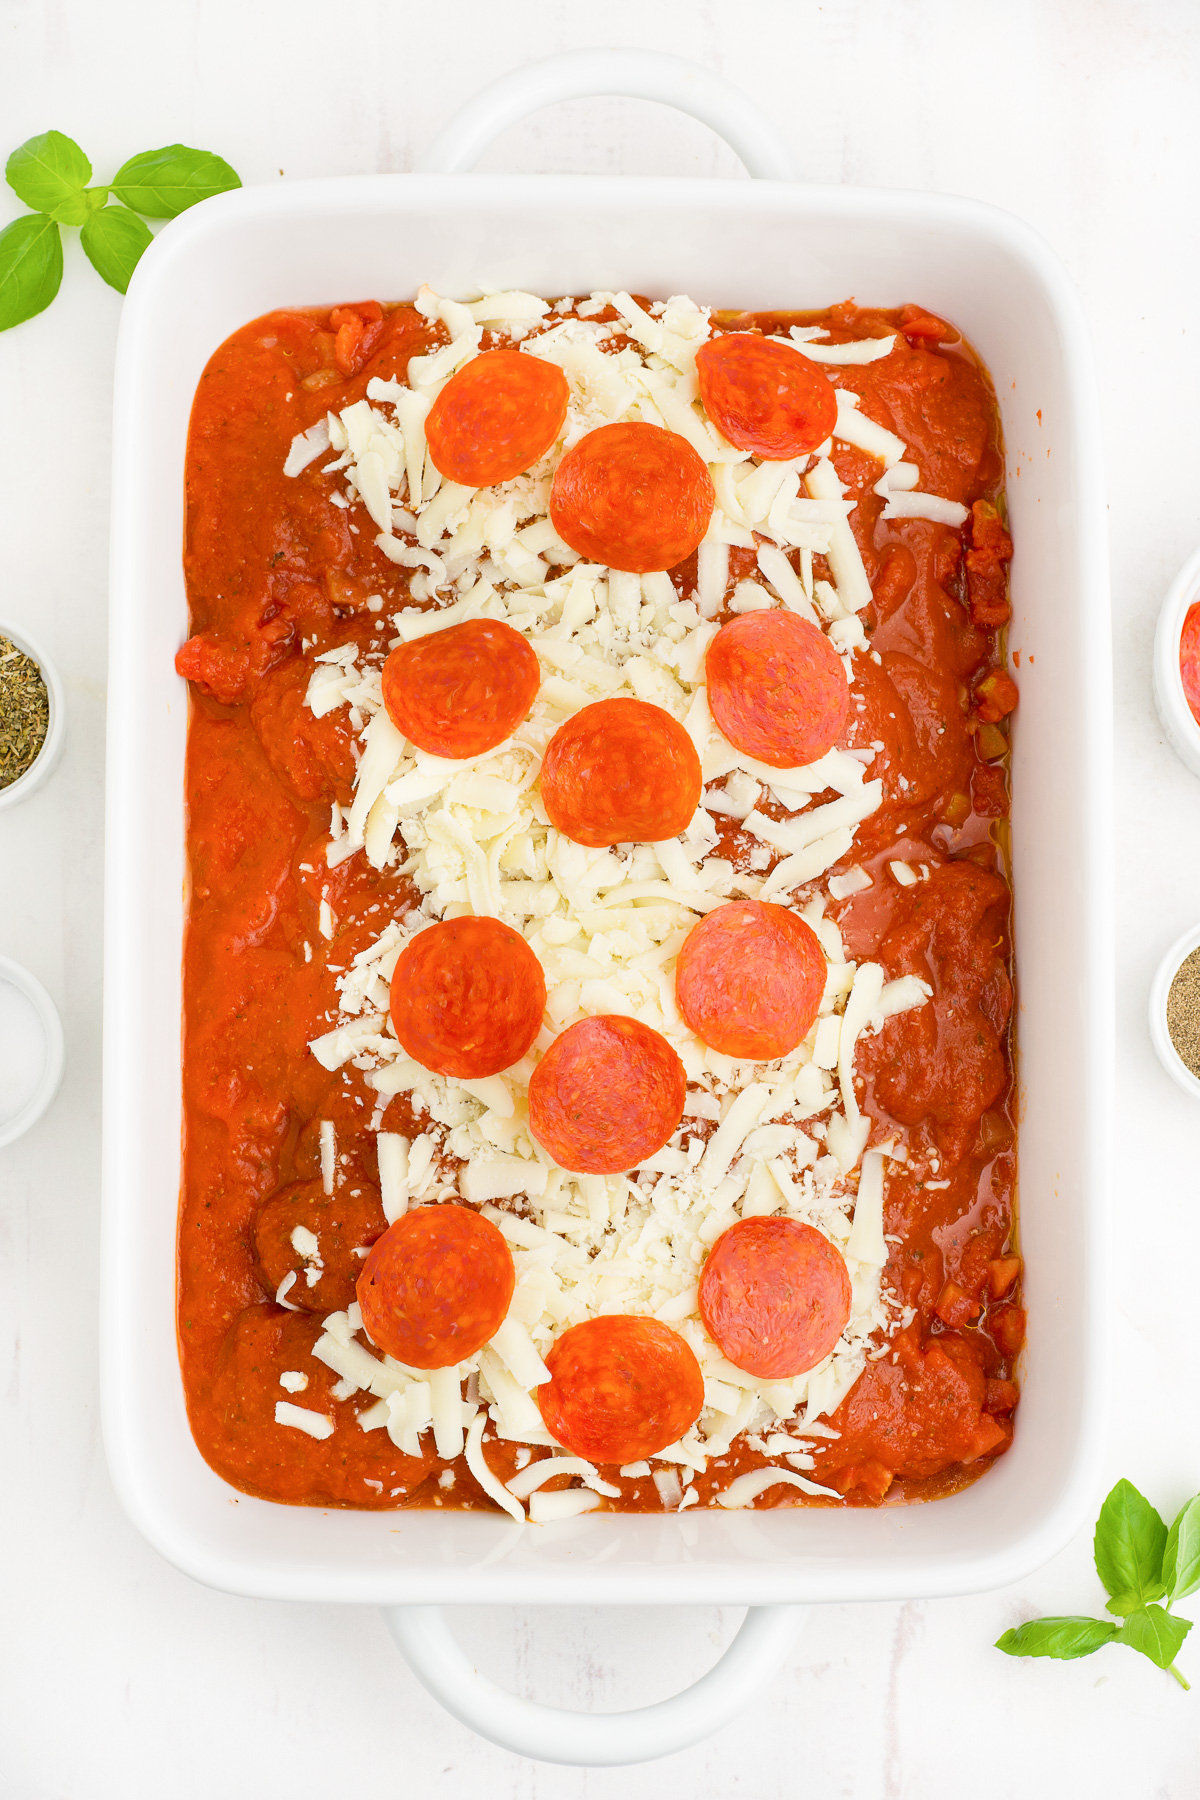 Raw chicken covered in tomato sauce, diced tomatoes, pepperoni and cheese in a baking dish from overhead.